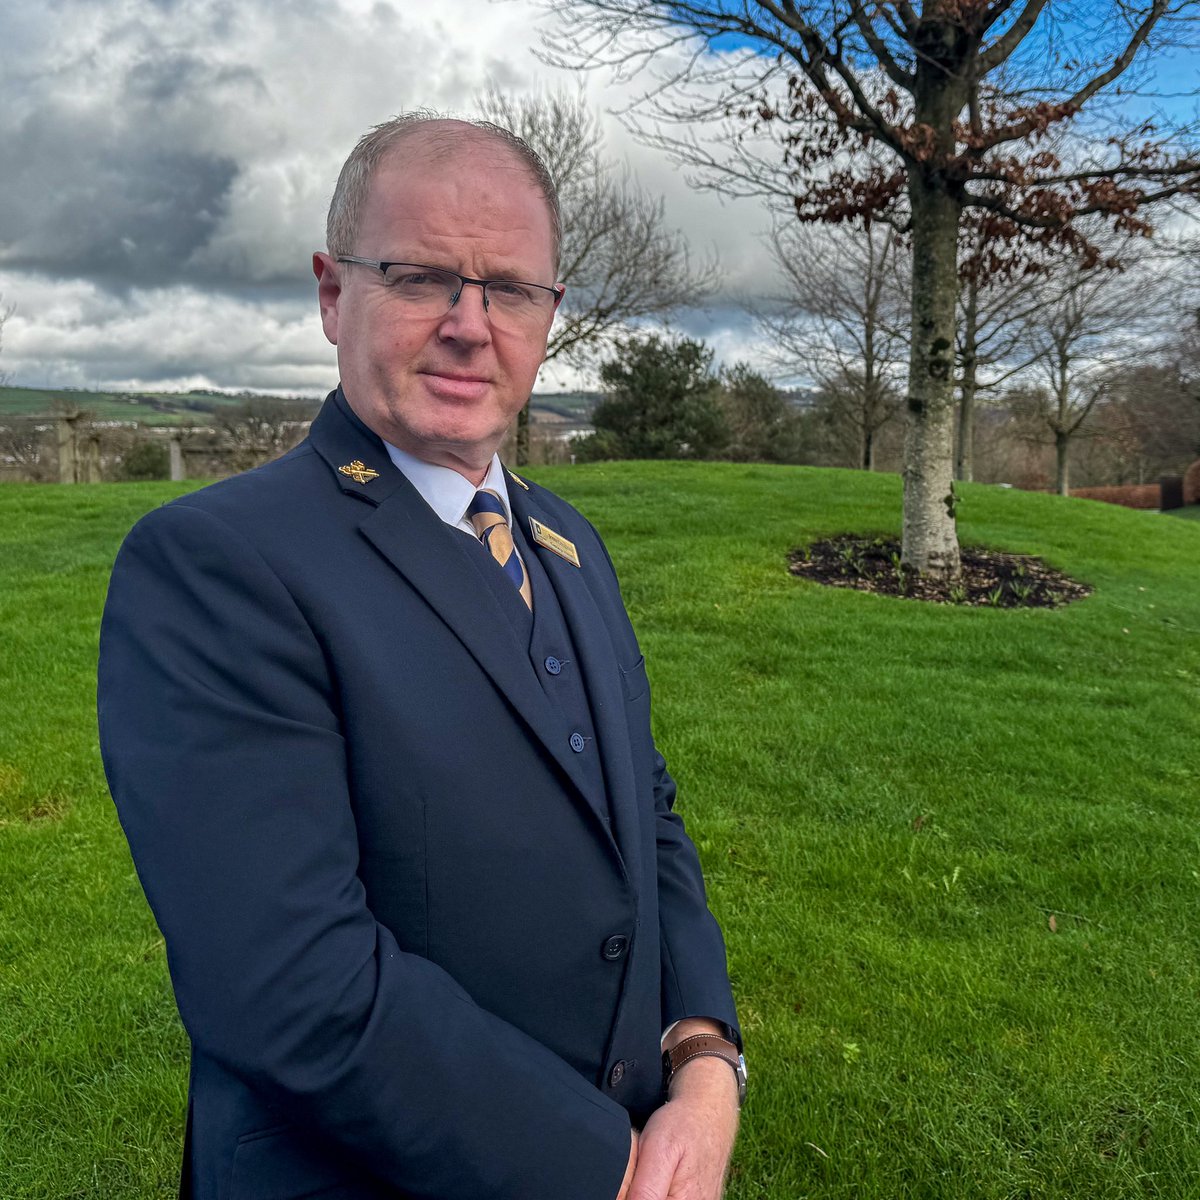 I am honoured and delighted to have been elected general secretary of @LesClefsdOrIre . I look forward to this next chapter in helping continue to develop and deliver the ultimate guest experience for our guests throughout the Island of Ireland #GuestExperience @LesClefsdOrIntl